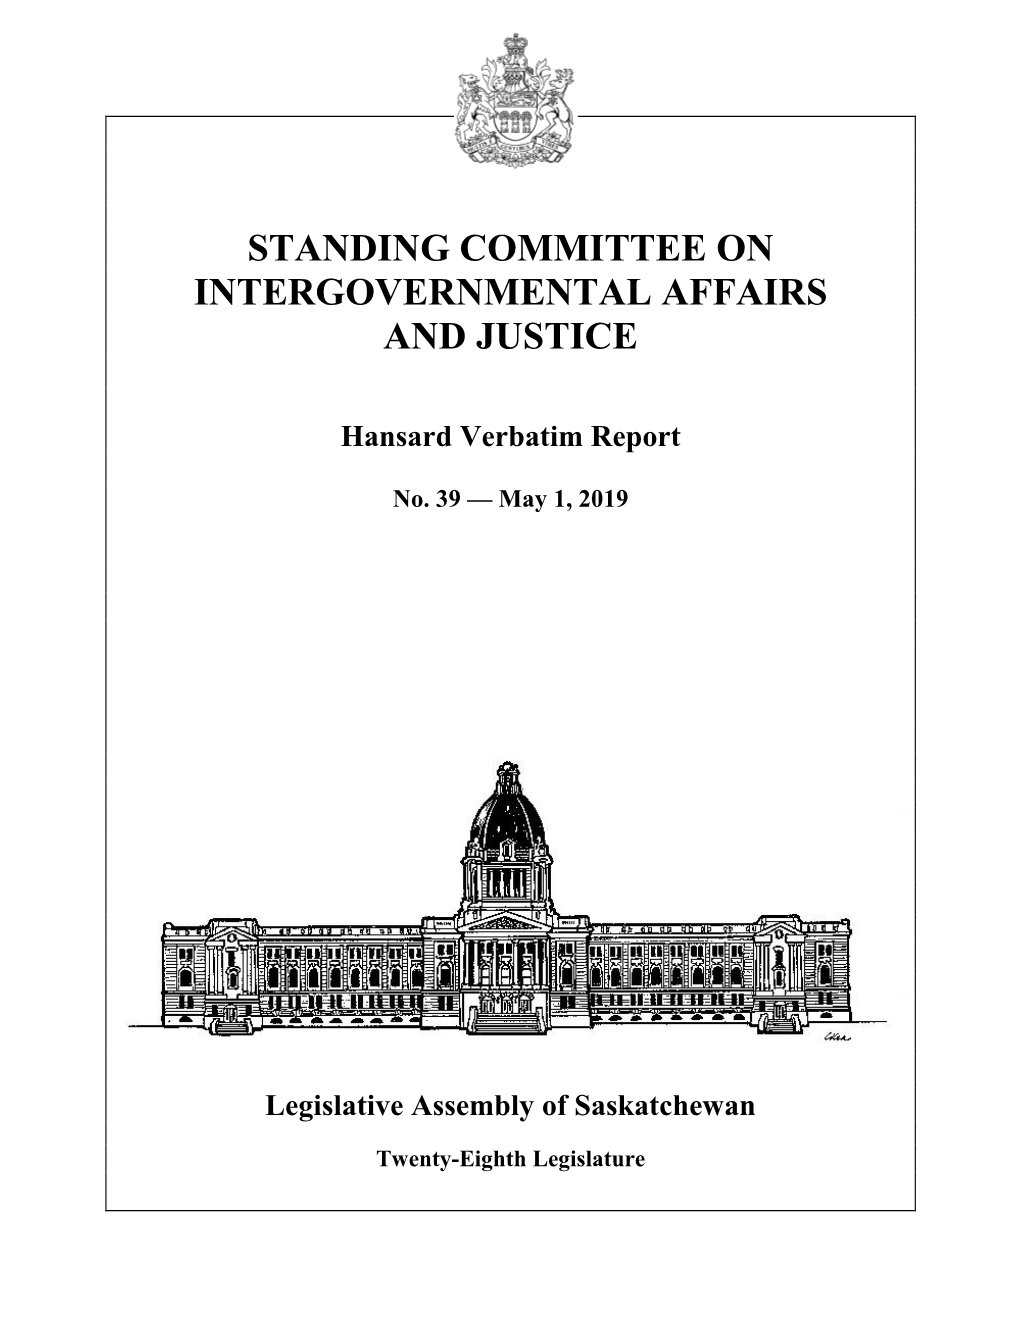 May 1, 2019 Intergovernmental Affairs and Justice Committee 605